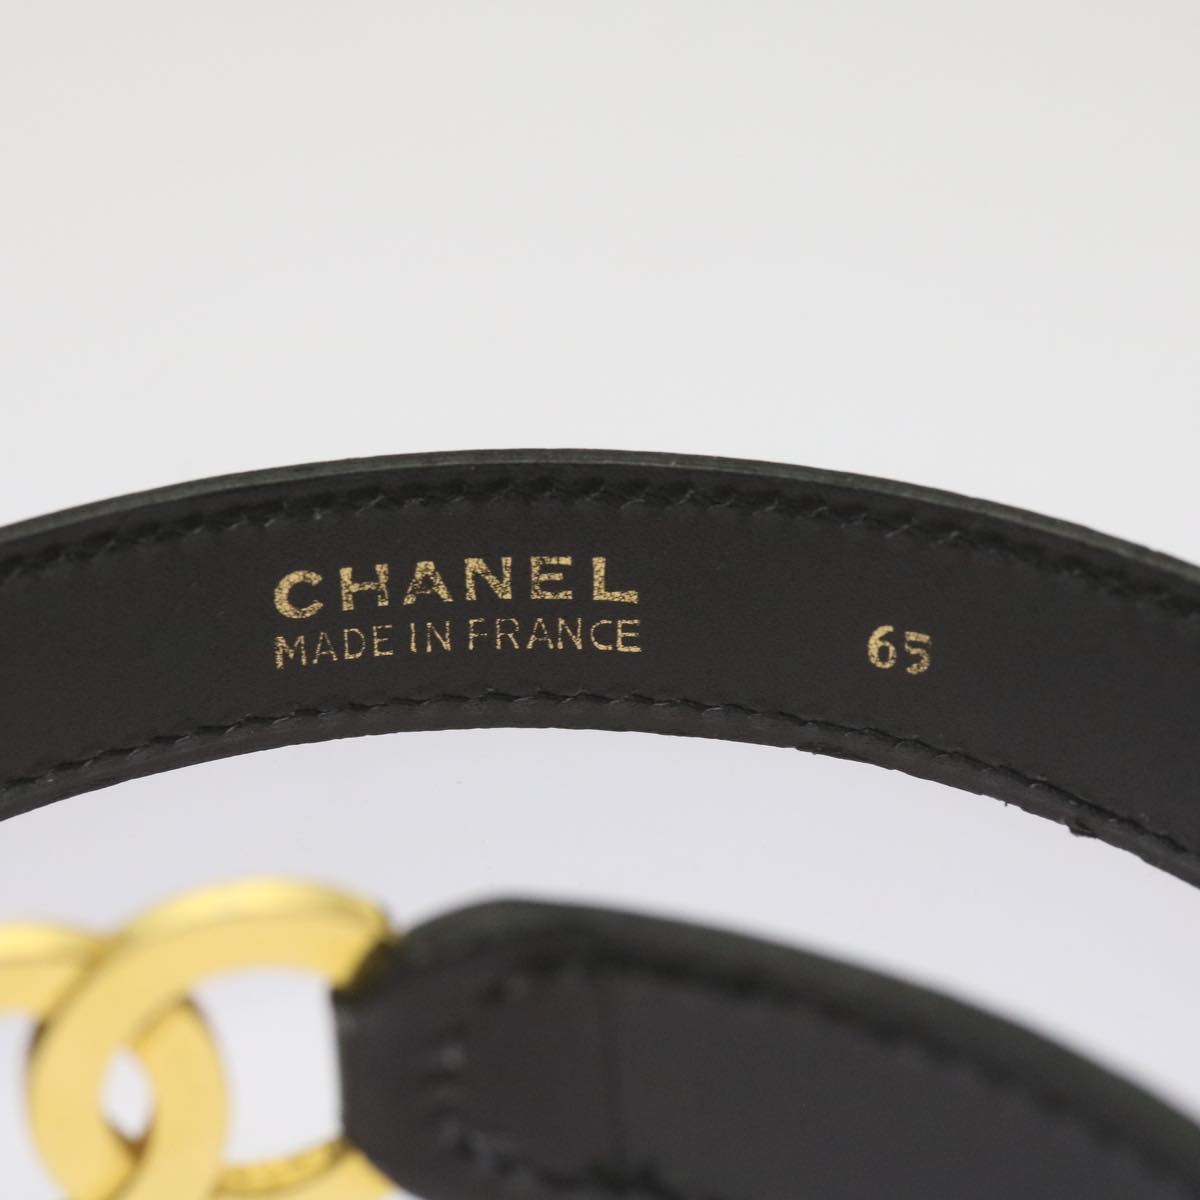 CHANEL COCO Mark Belt Leather 28"" Black CC Auth 68326